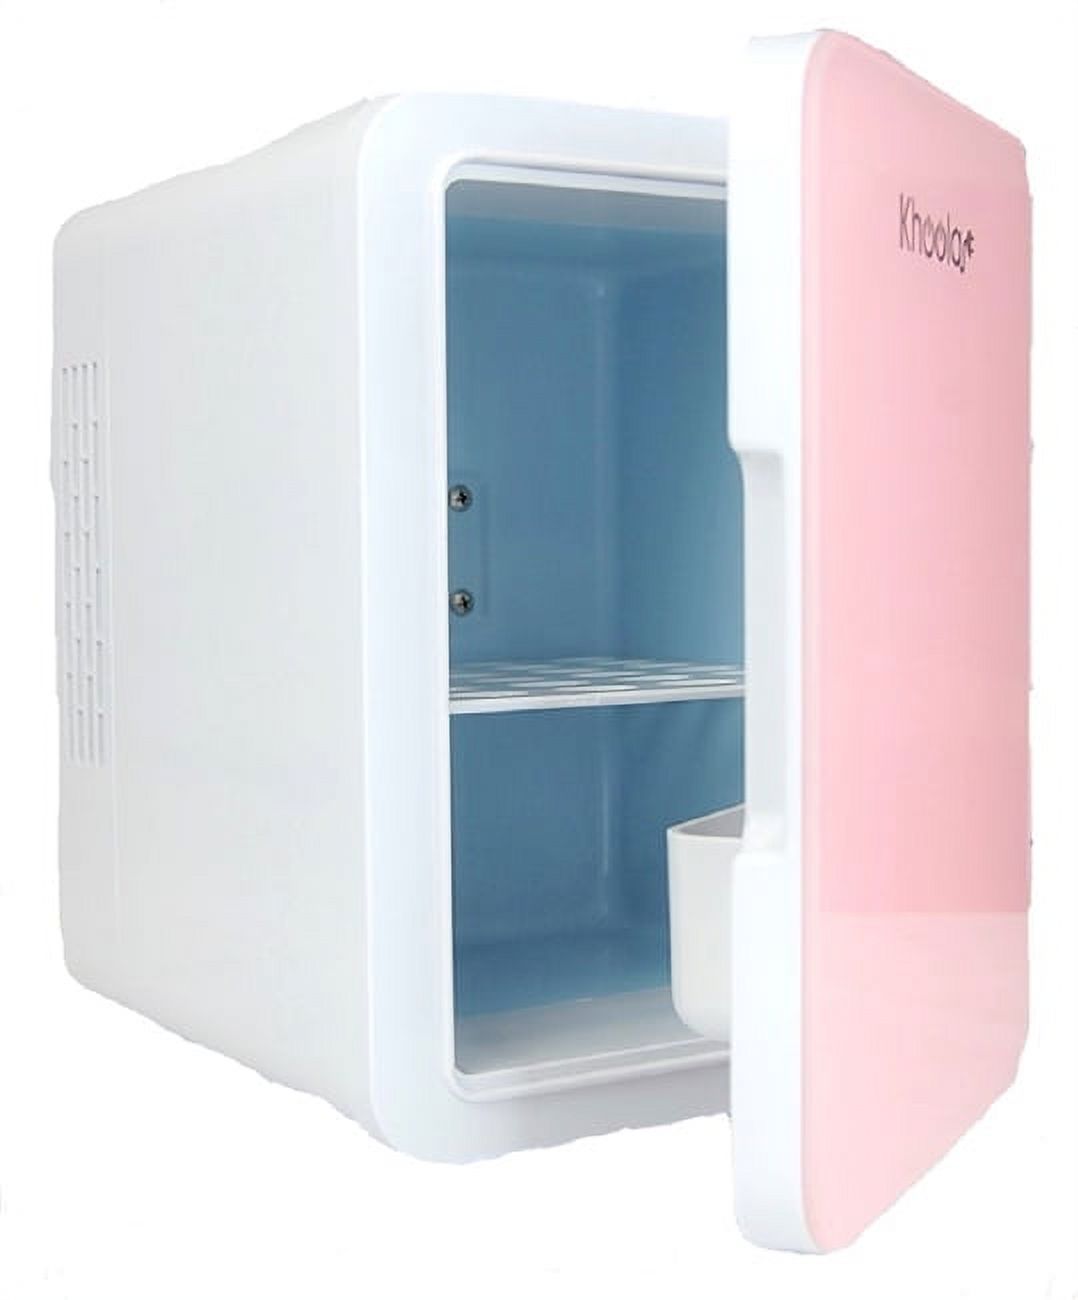 Xtrempro PC01-04PK 4 liter Portable Cooler & Warmer Compact Mini Refrigerator with Eraser Door Board,, Pink - image 2 of 5